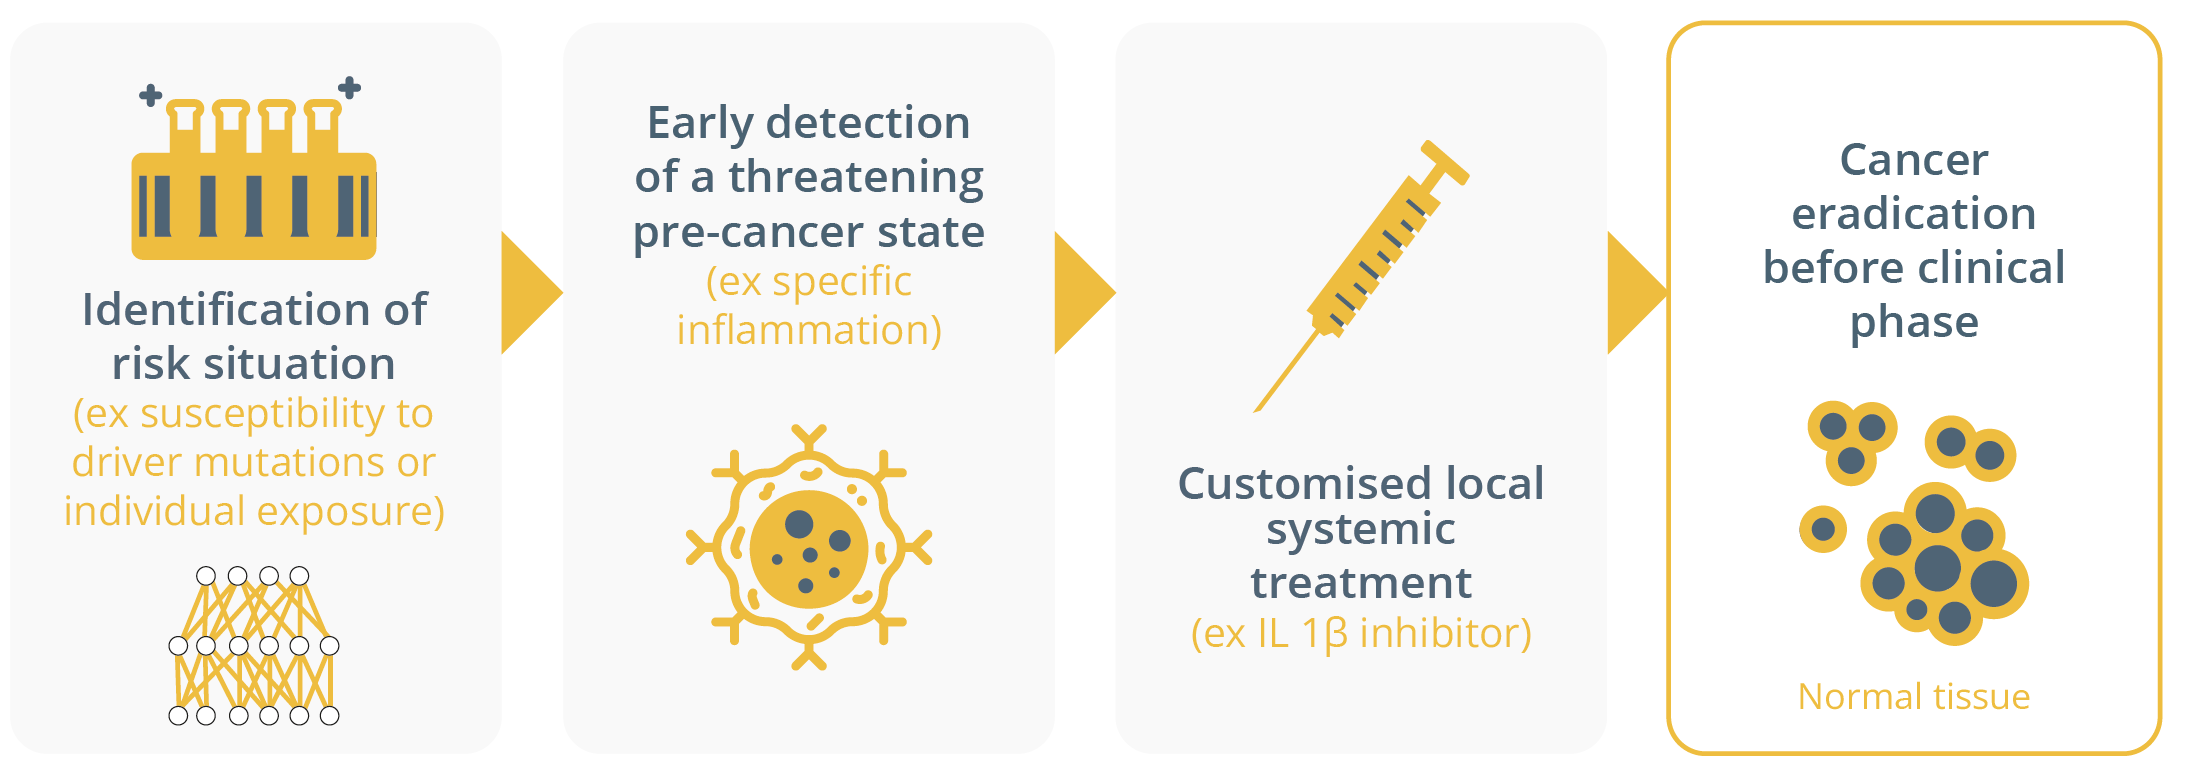 A model for cancer interception is a combination of early detection and biomarker-driven therapies to eradicate cancer prior to the clinical phase